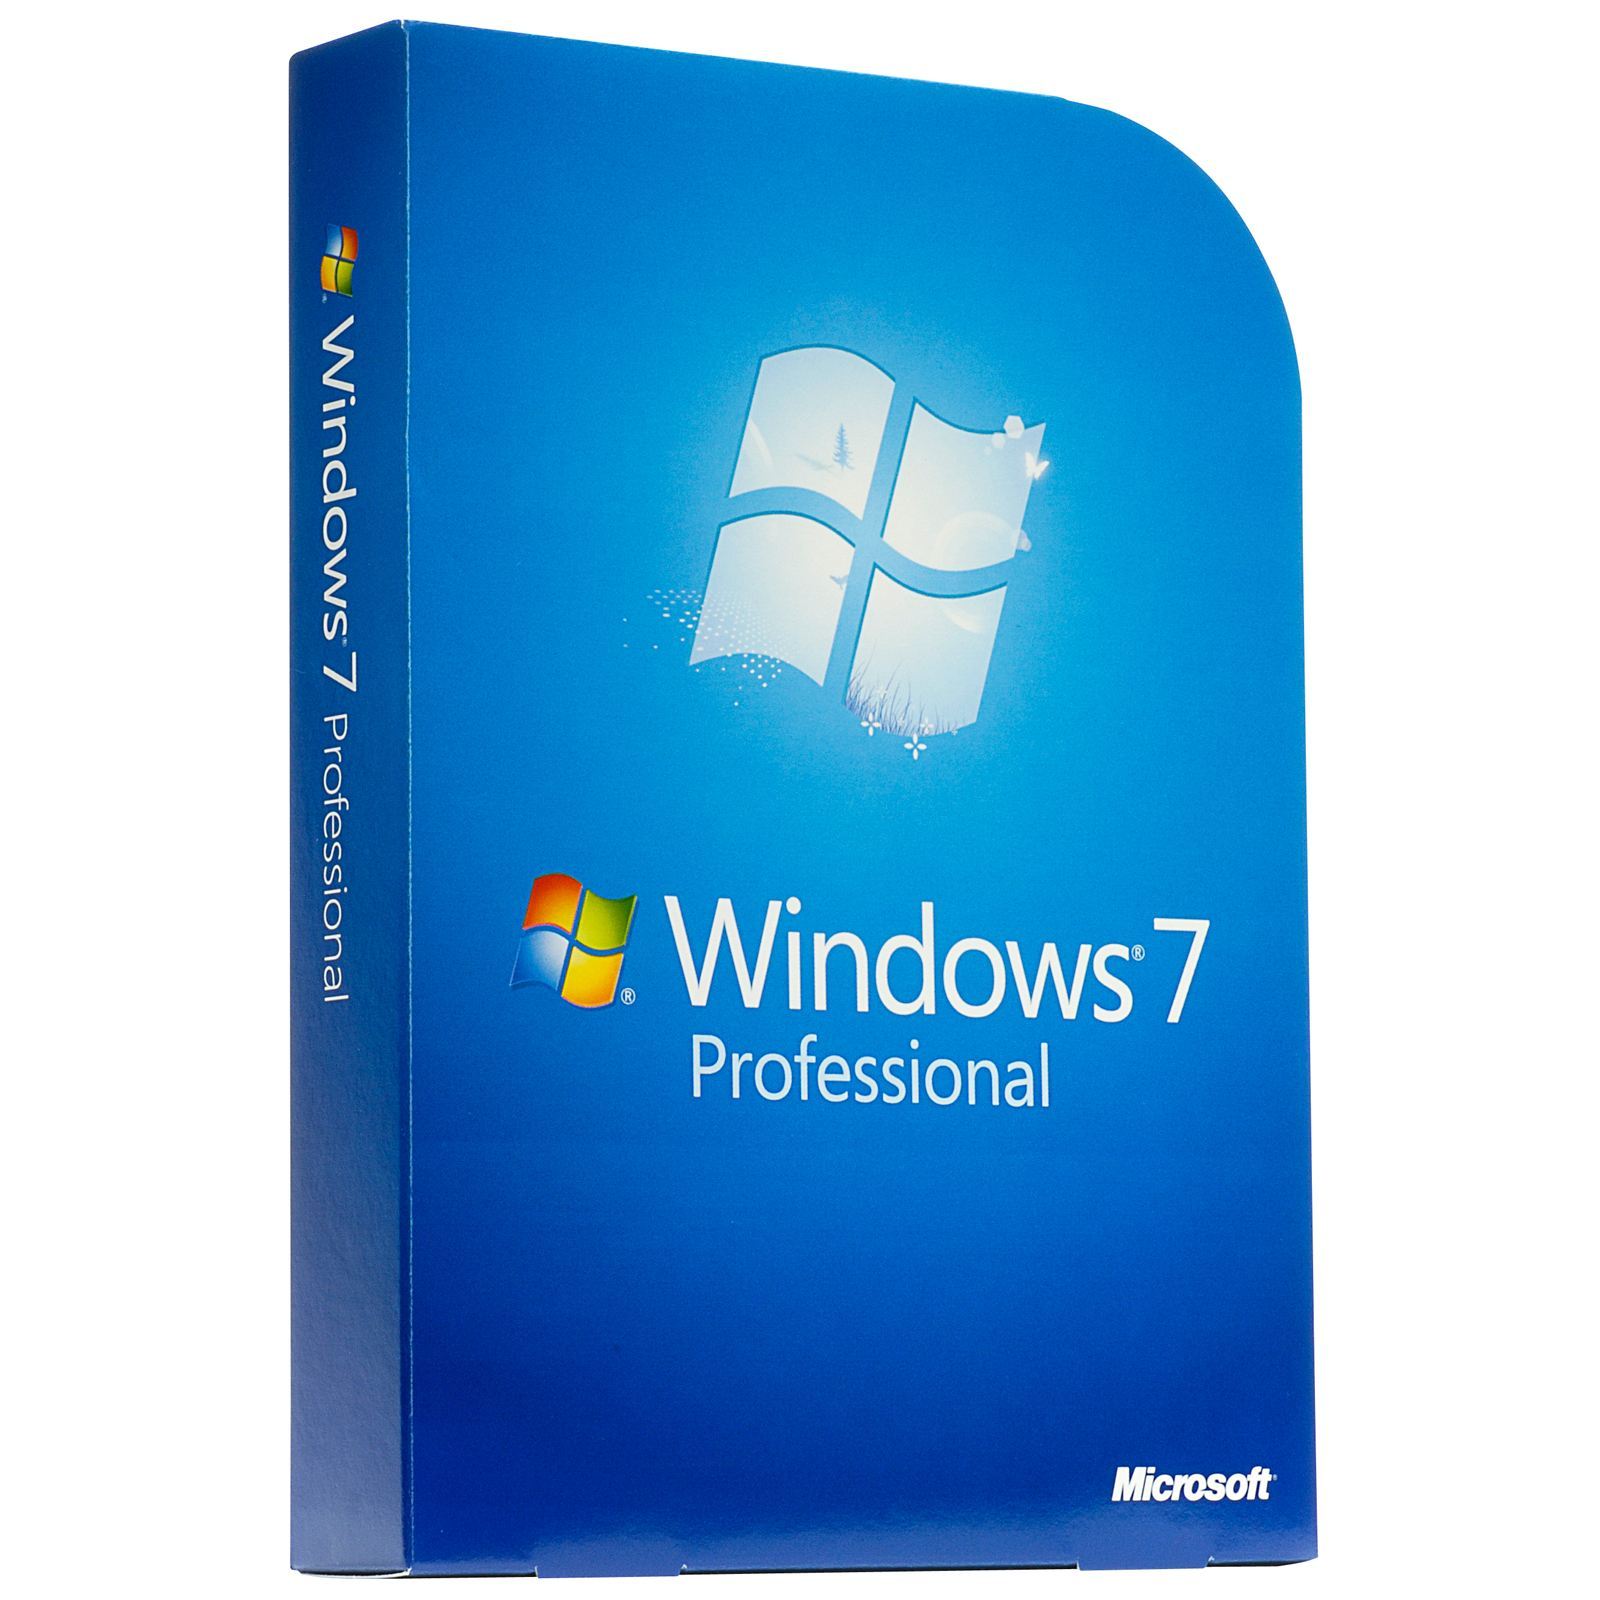 windows 7 32 iso download